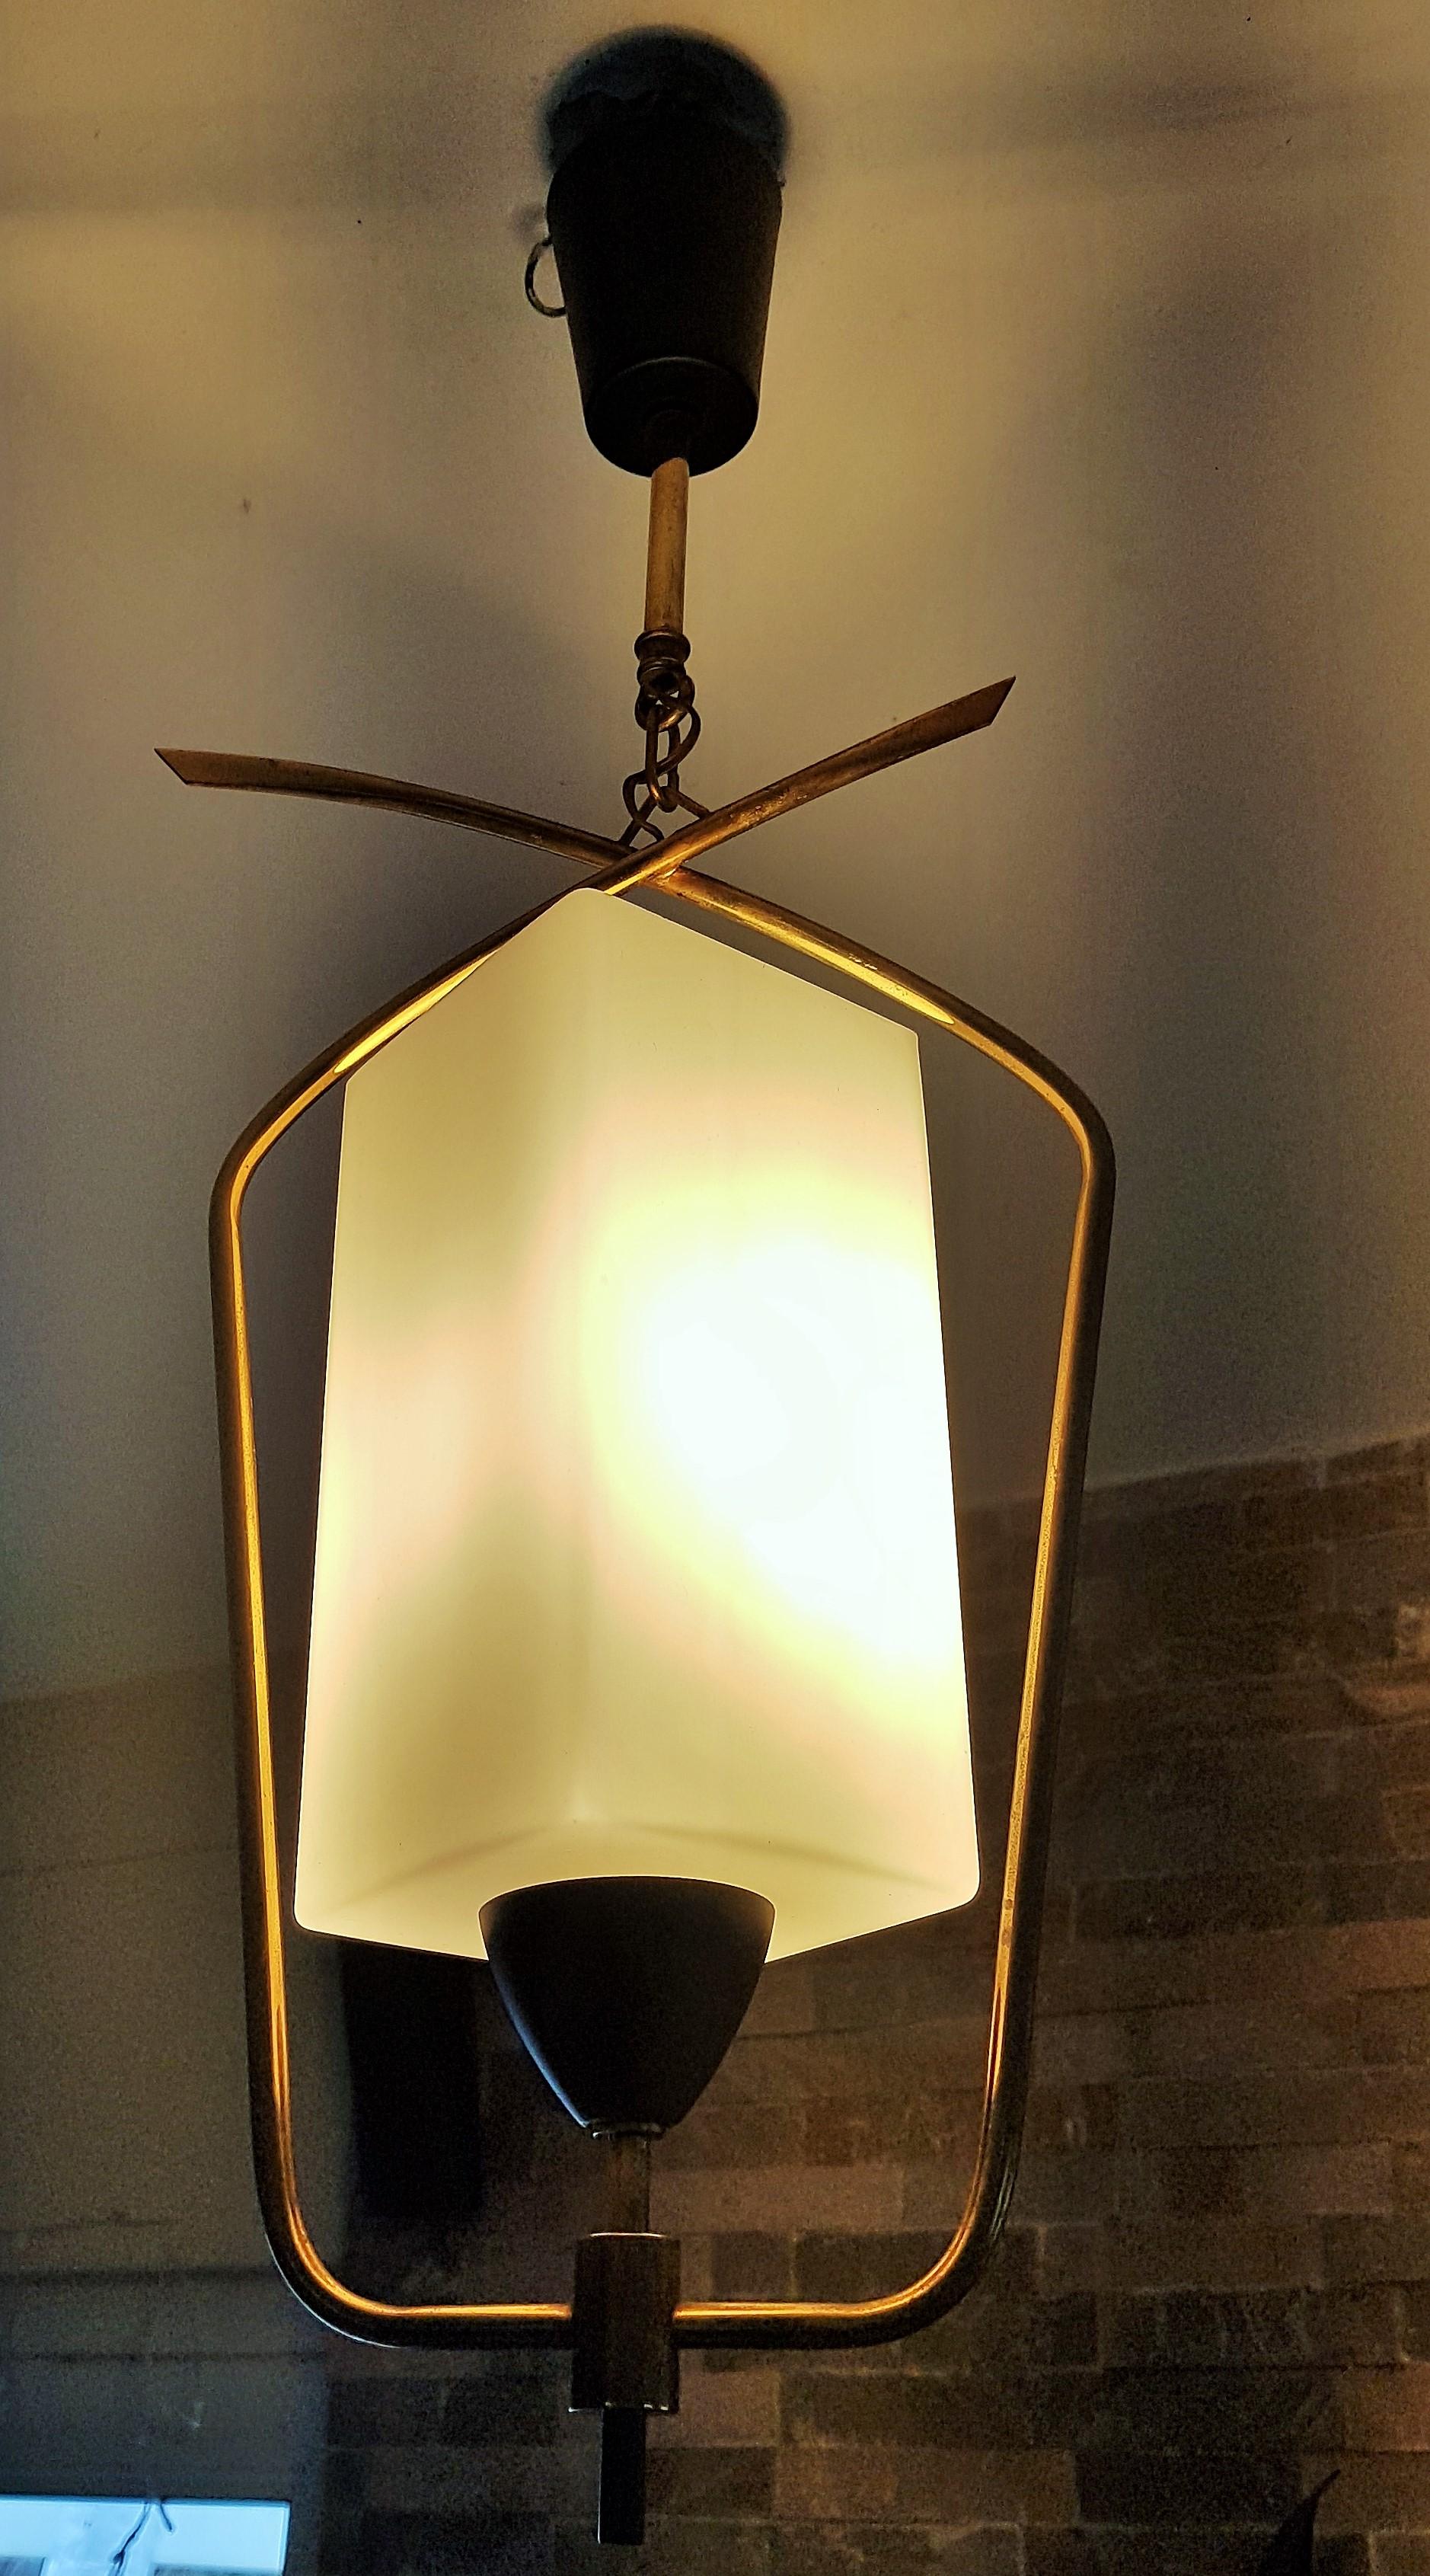 Midcentury brass and glass.
Pendant Lantern by Arlus, France, 1950
Perfect vintage condition.
One socket b22 with adapter e14.